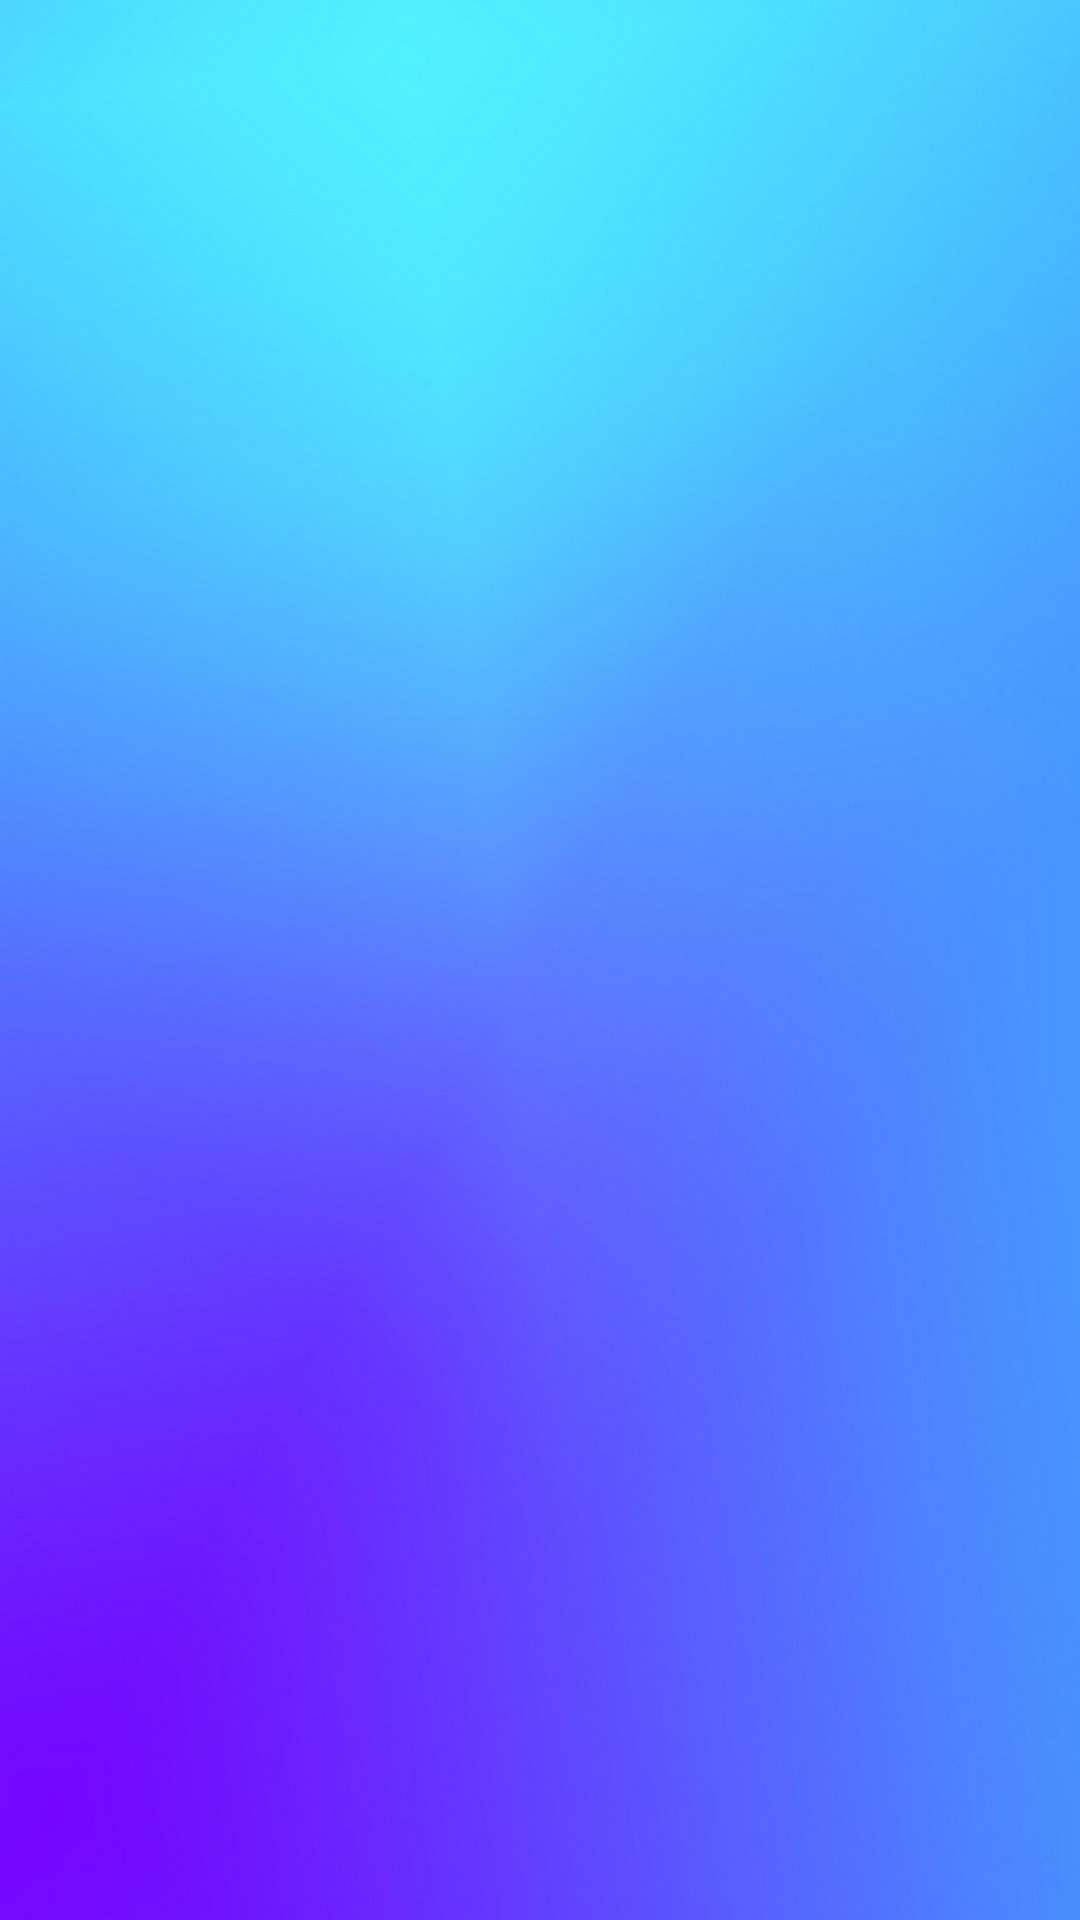 Wallpapers Iphone Gradient With High-resolution Pixel - Blue Gradient Iphone Background - HD Wallpaper 